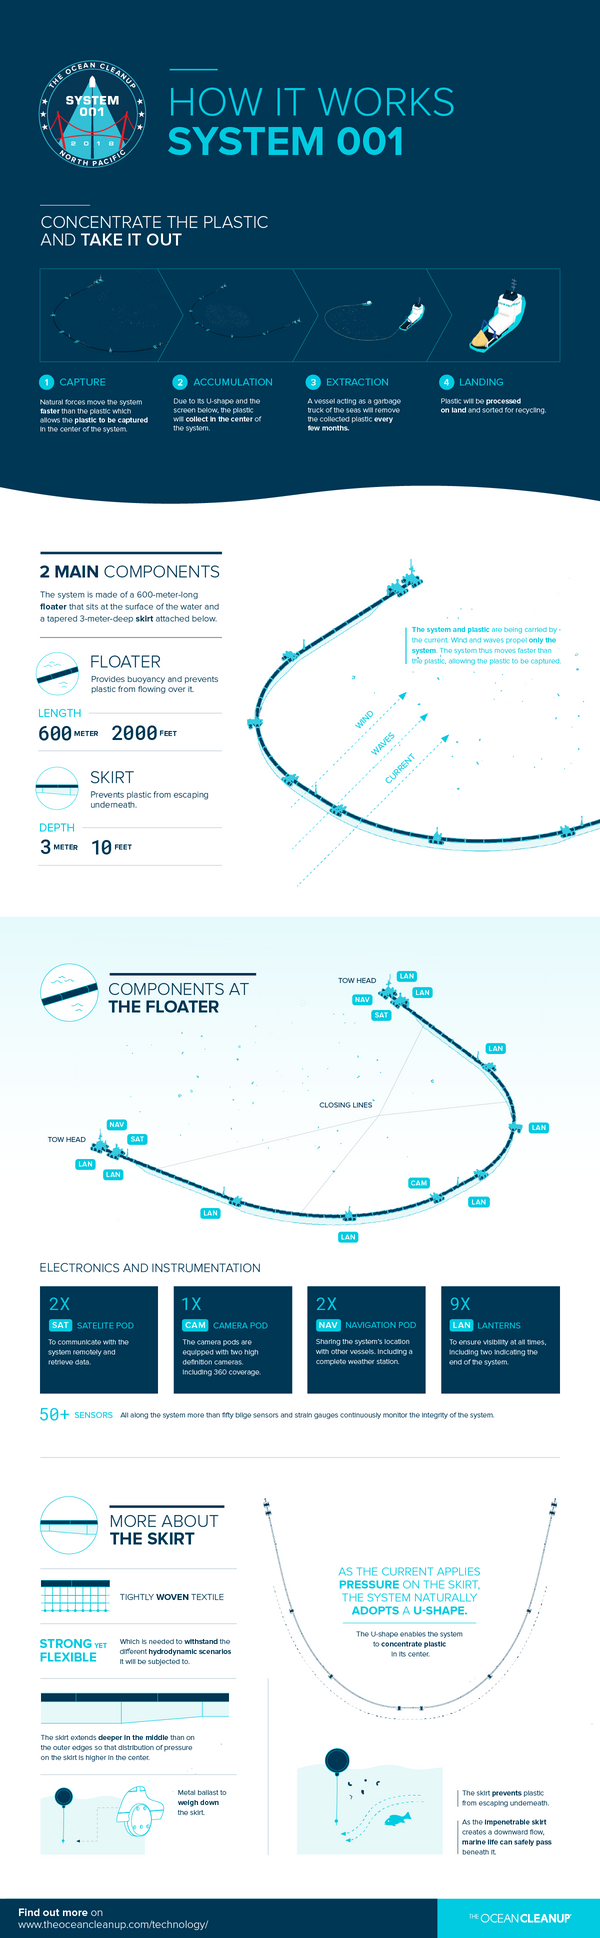 System 001 infographic - How it works